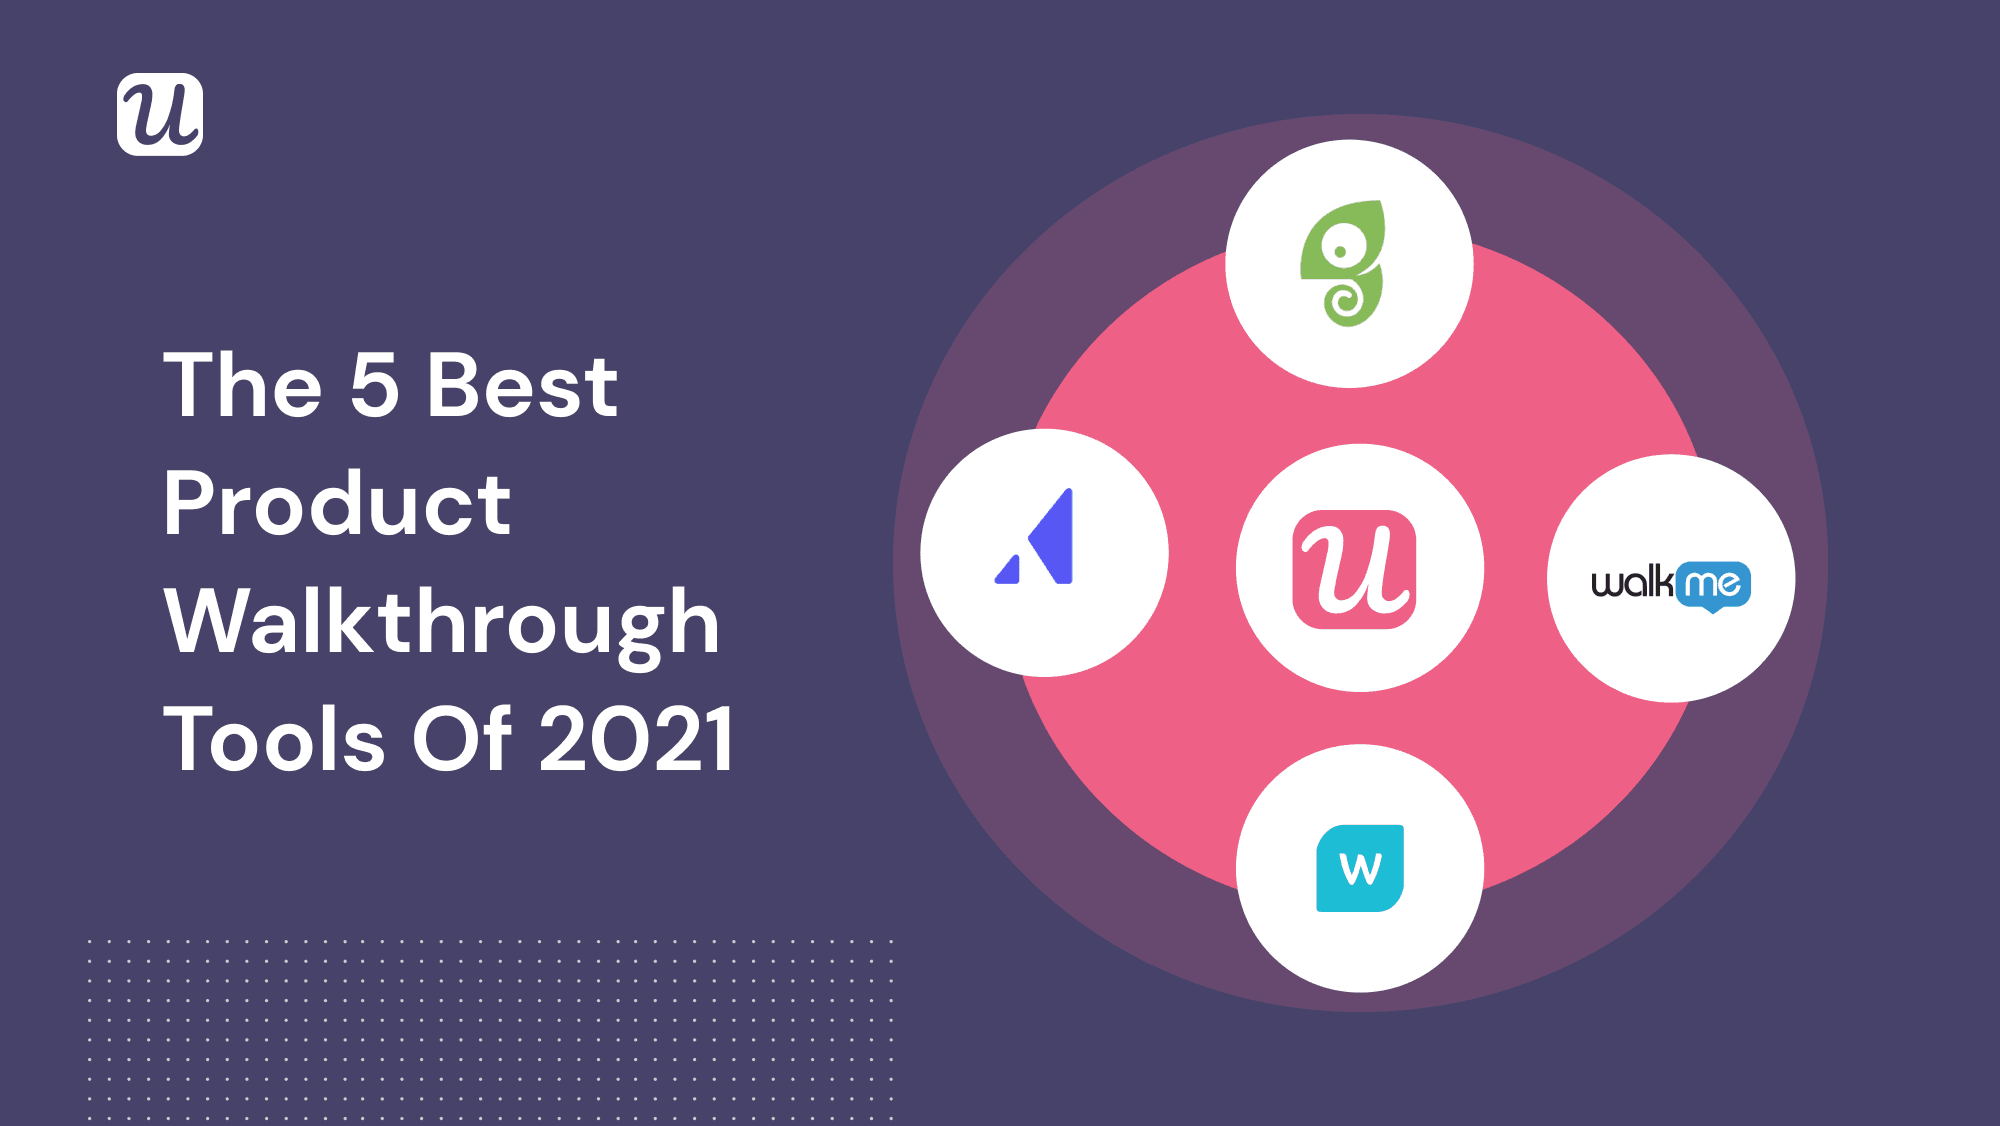 The 5 Best Product Walkthrough Tools of 2021